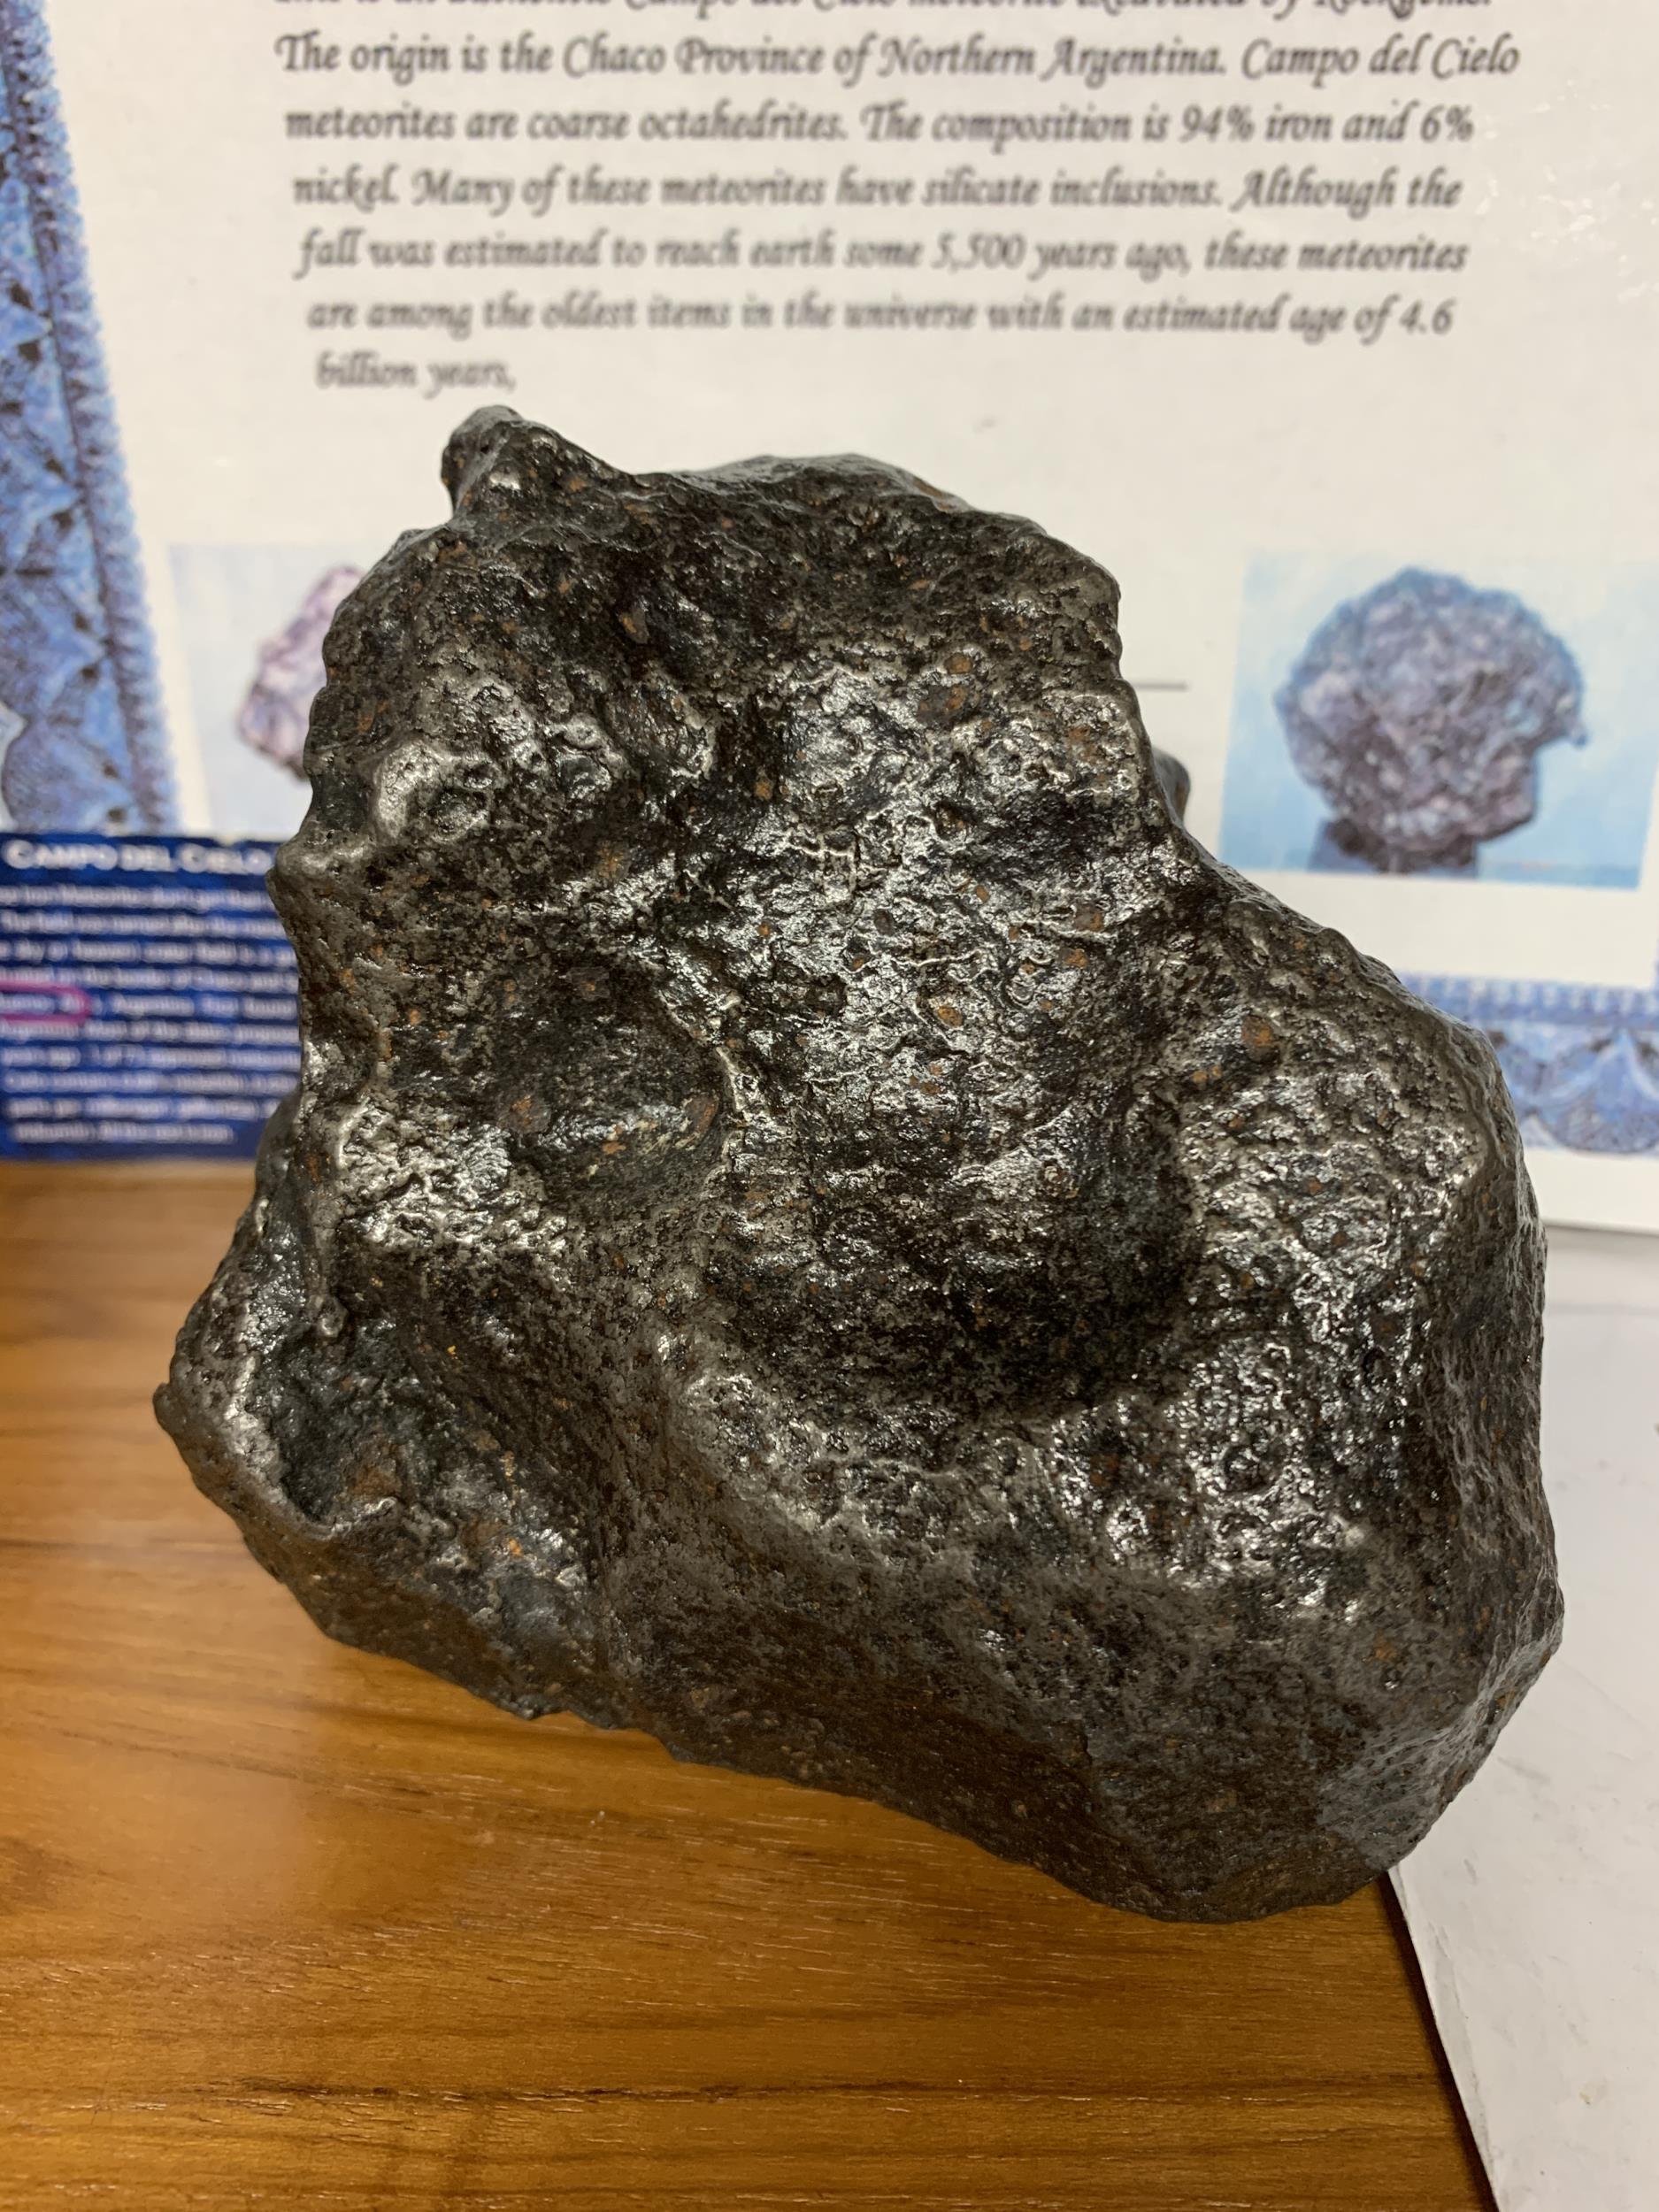 A 5KG CAMPO DEL CIELO IRON METEORITE WITH CERTIFICATE OF AUTHENTICITY, 4000 - 6000 YEARS OLD - Image 2 of 5